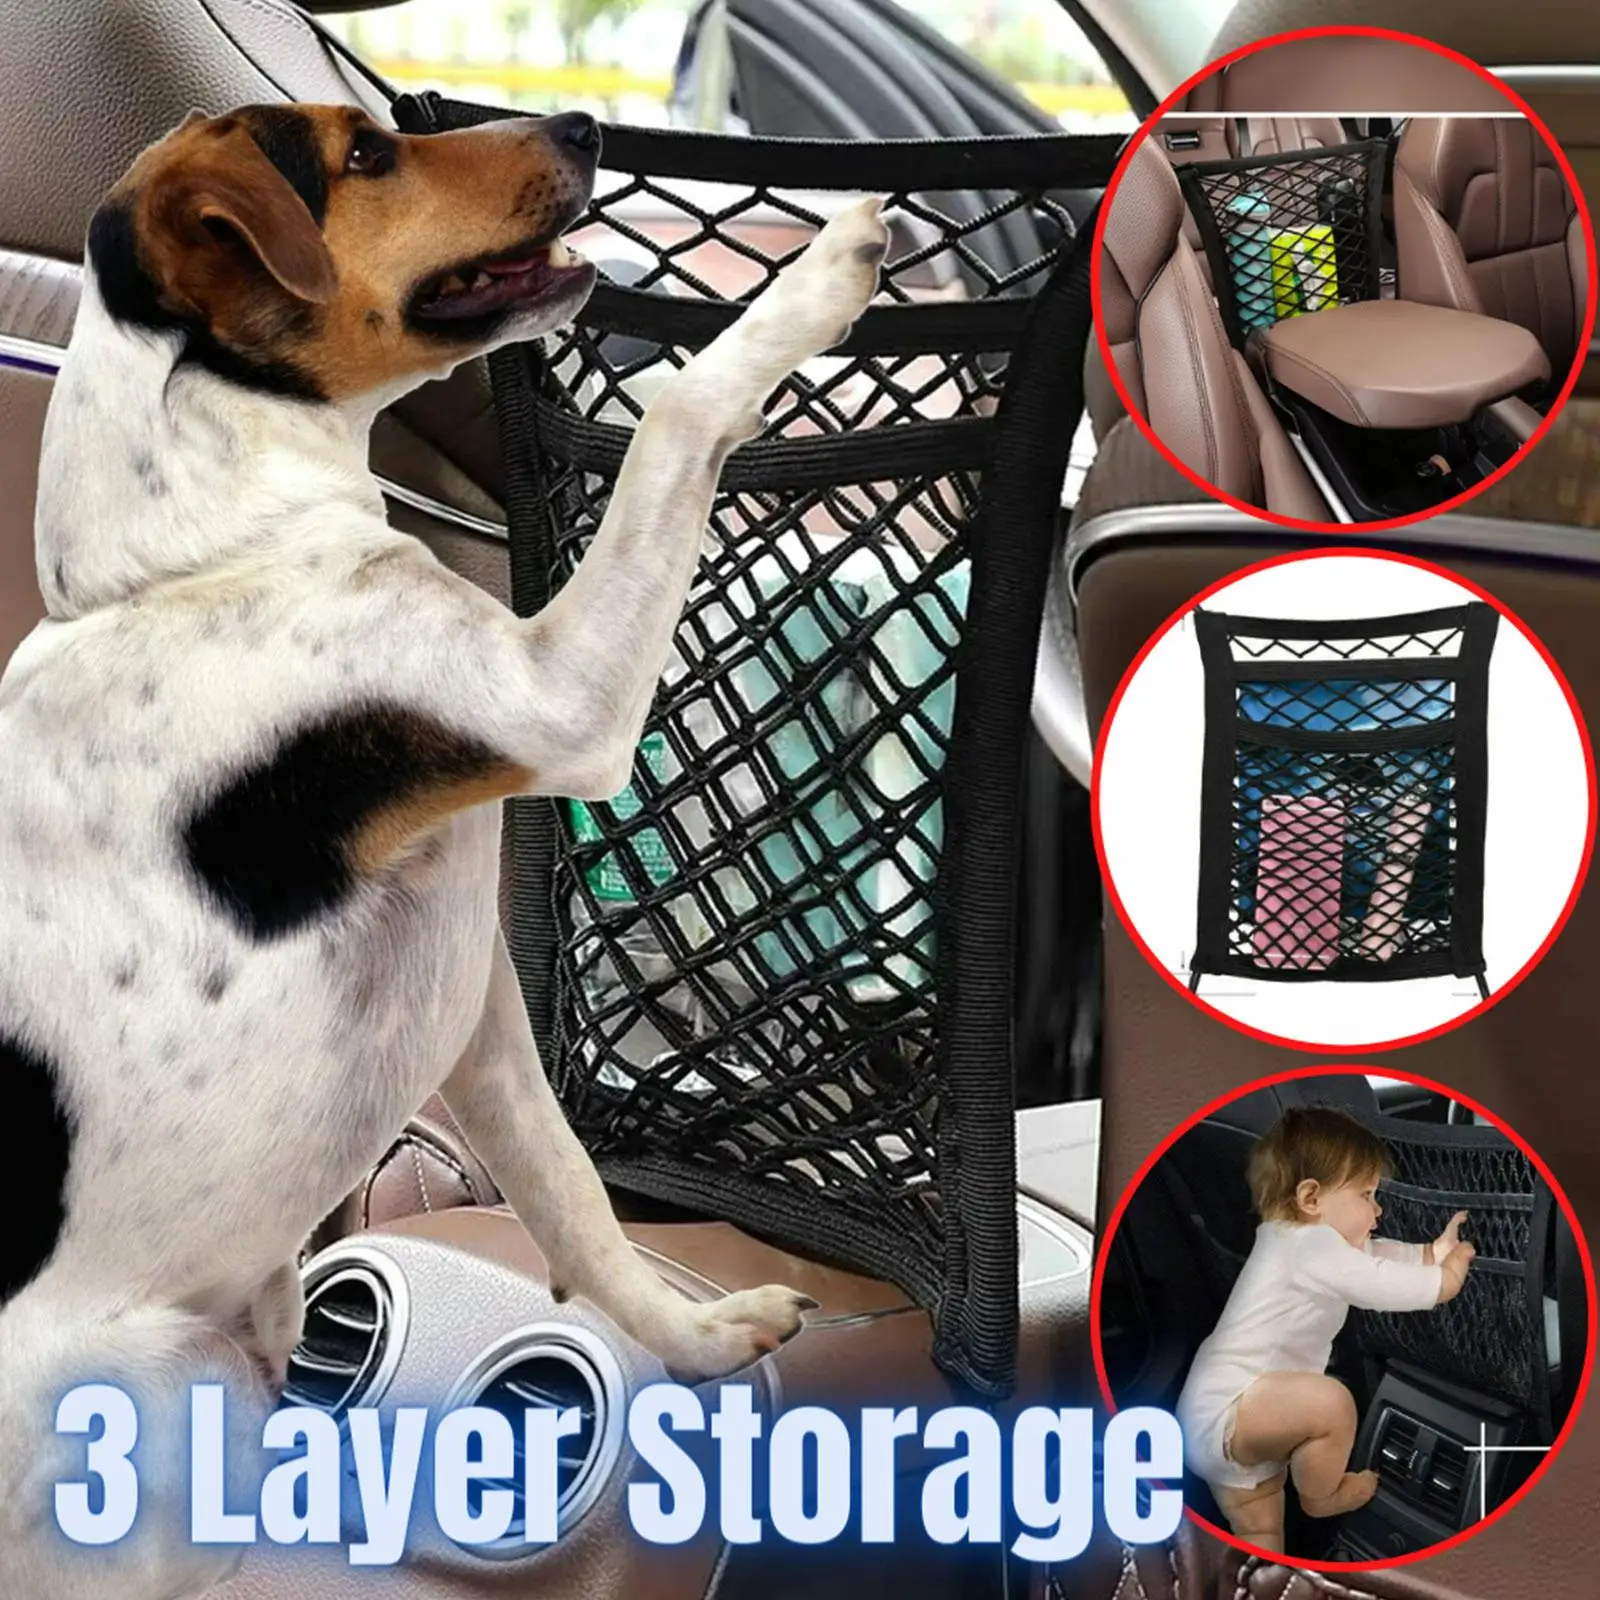 

Universal Car Net Organizer Standard Between Seat Mesh Storage Net with Pockets Polyester Front Seat Dog Barrier for Cars Trucks